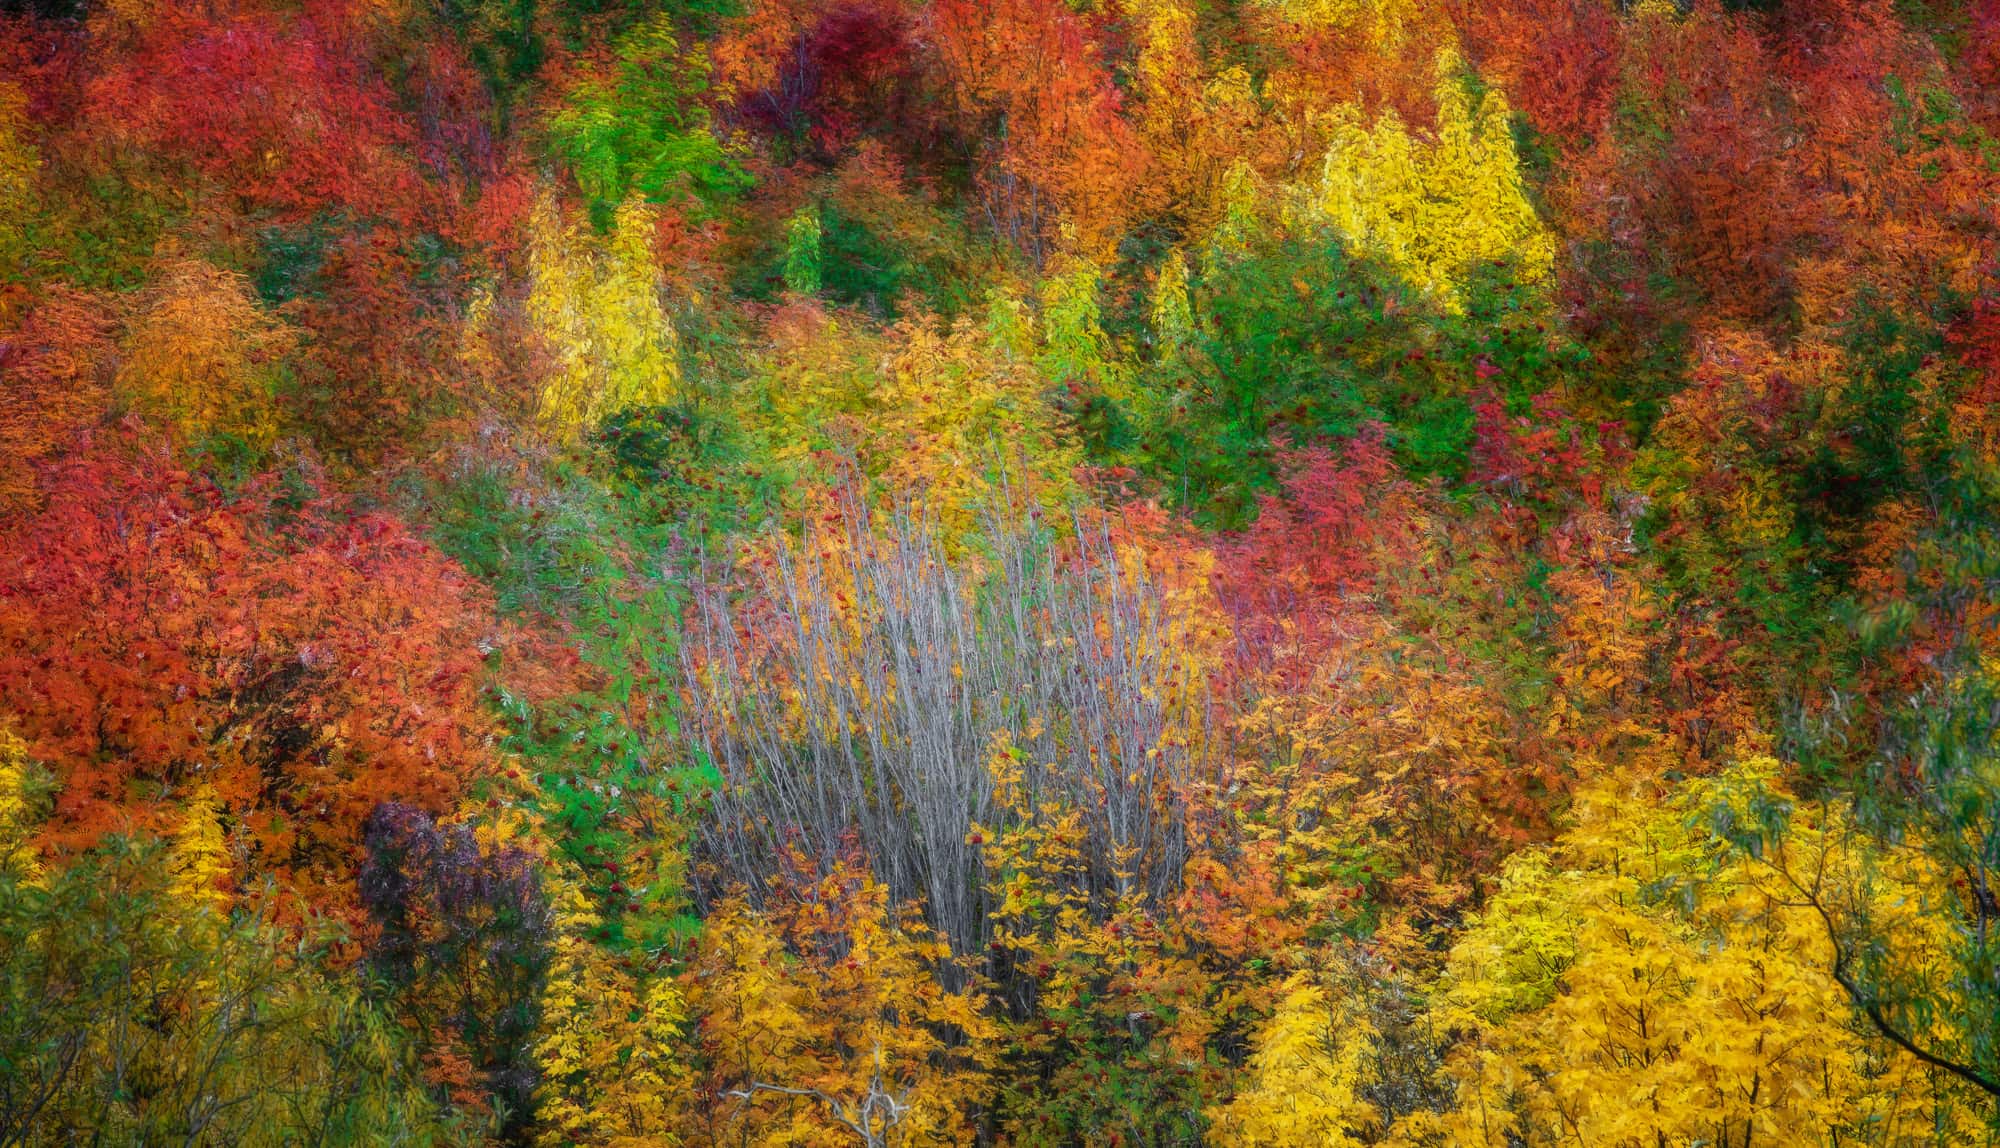 A blur of autumn colors in a Queenstown forest, with a mix of red, orange, and yellow leaves creating a dreamlike landscape.